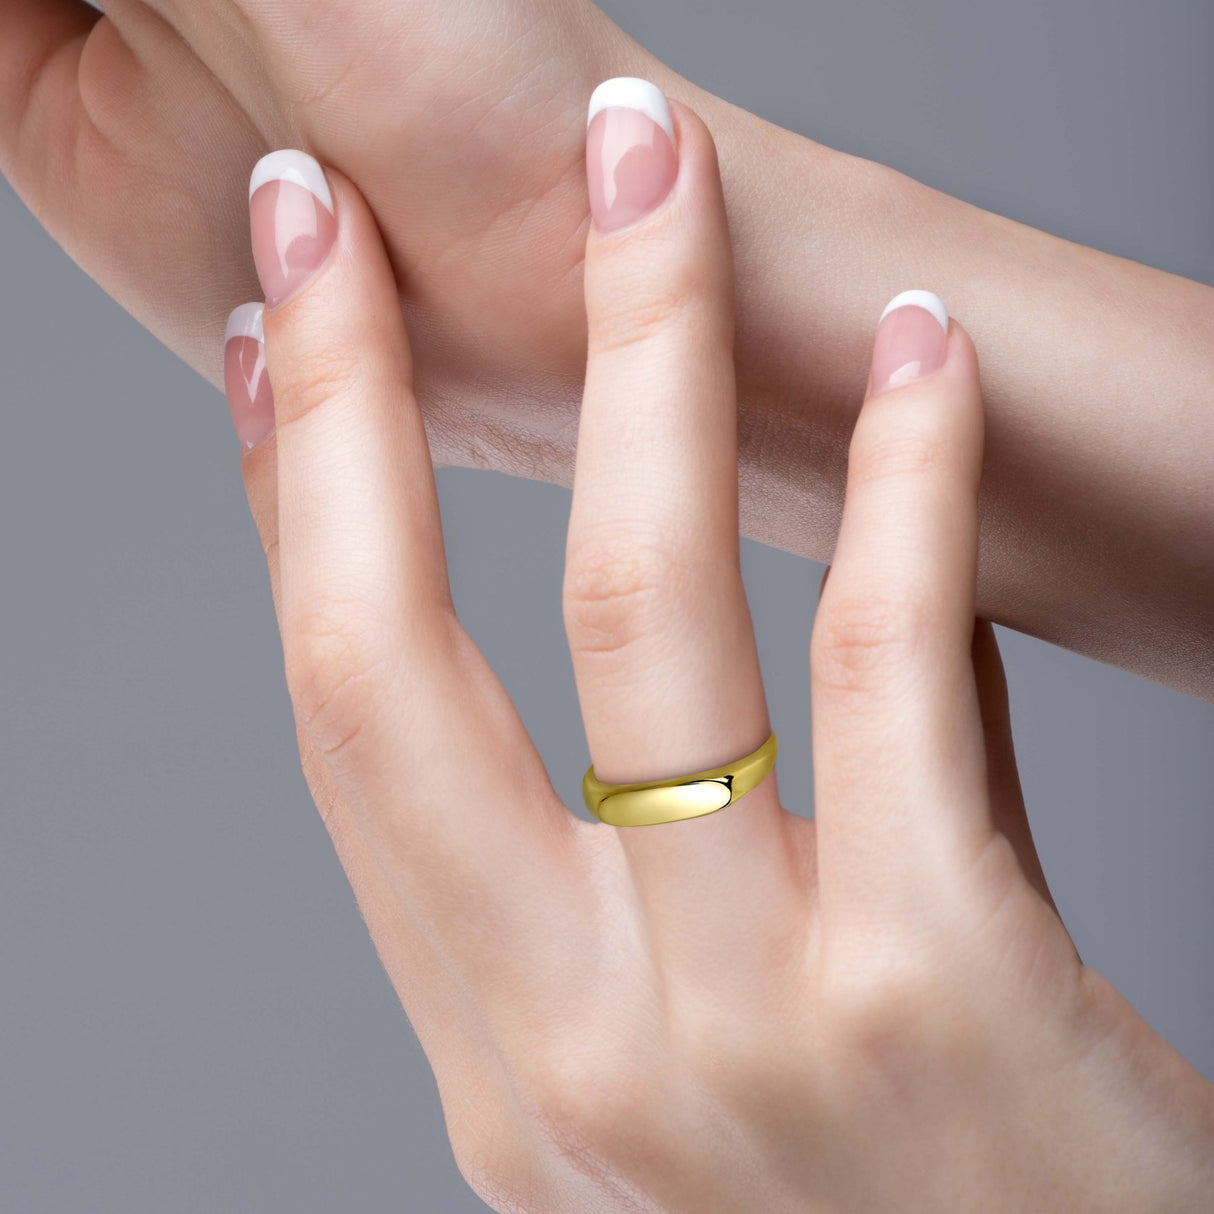 This ring features an elongated oval signet, a design element that harkens back to ancient times when signet rings were used as personal signatures. The sleek, elongated design adds a contemporary feel to the piece, making it a versatile accessory that can be dressed up or down, gold stackable ring, solid gold rings, 14K gold rings, diamond origin,